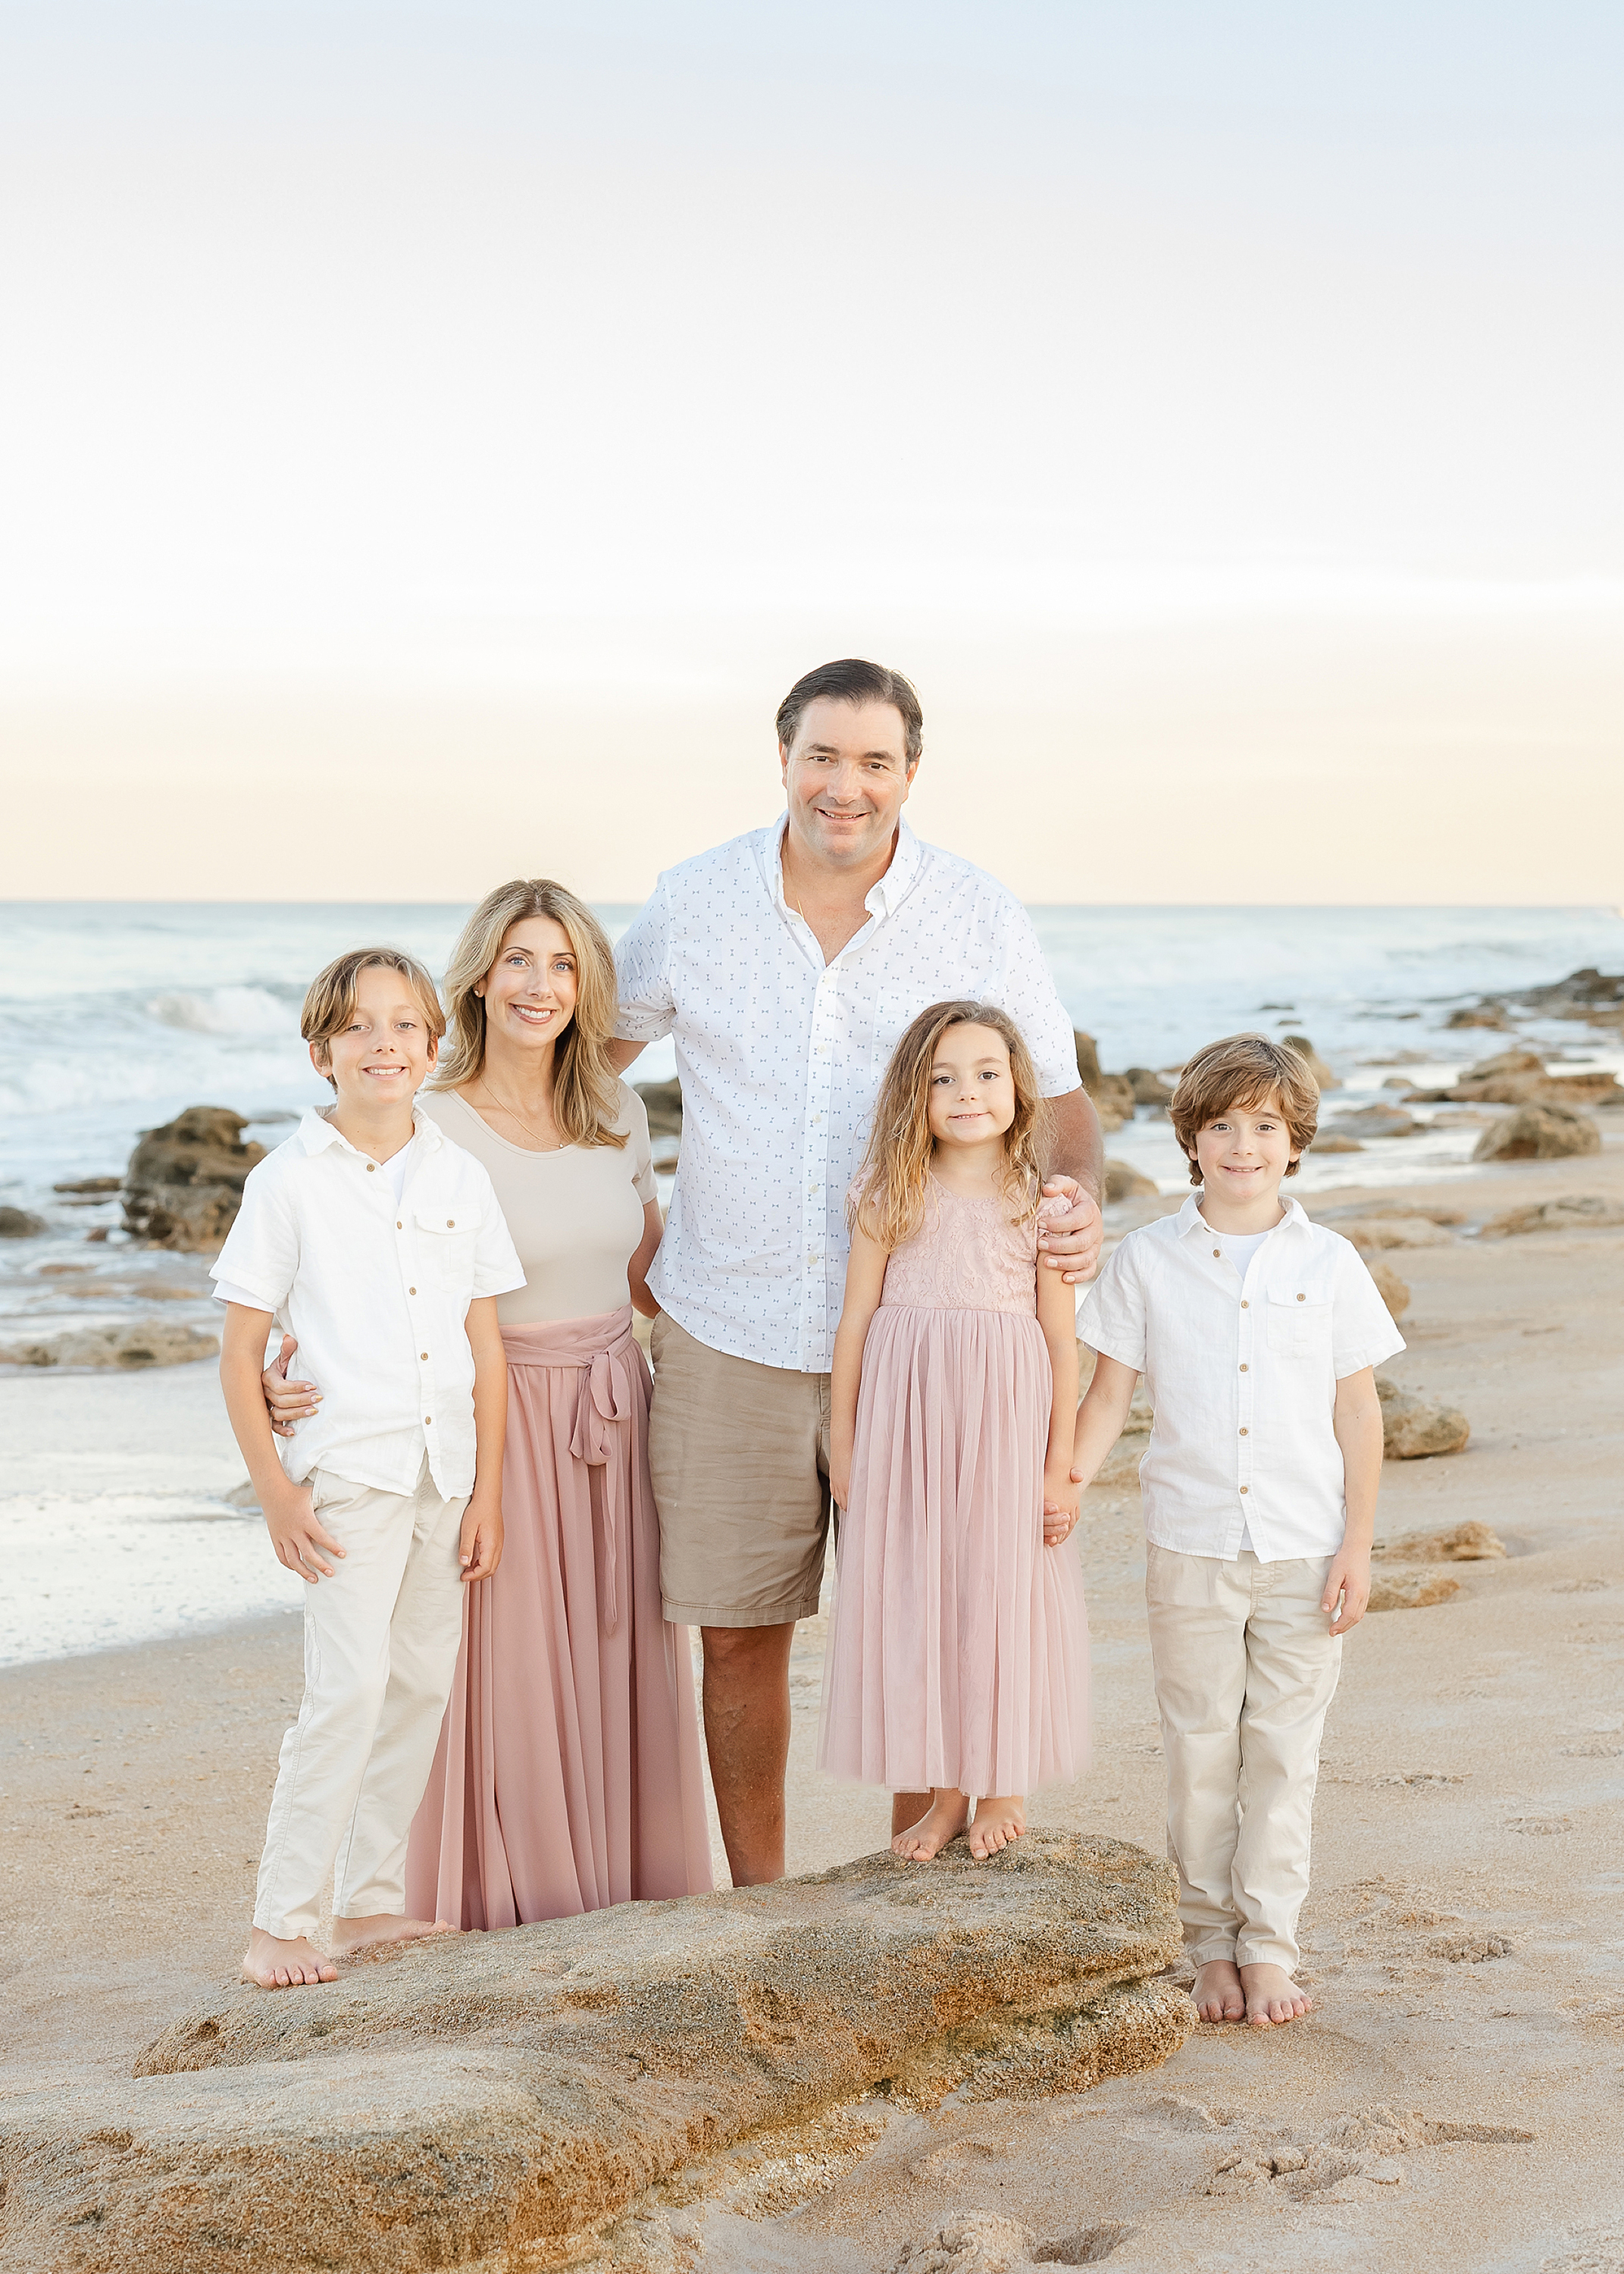 A pastel light and airy family beach portrait at sunset.